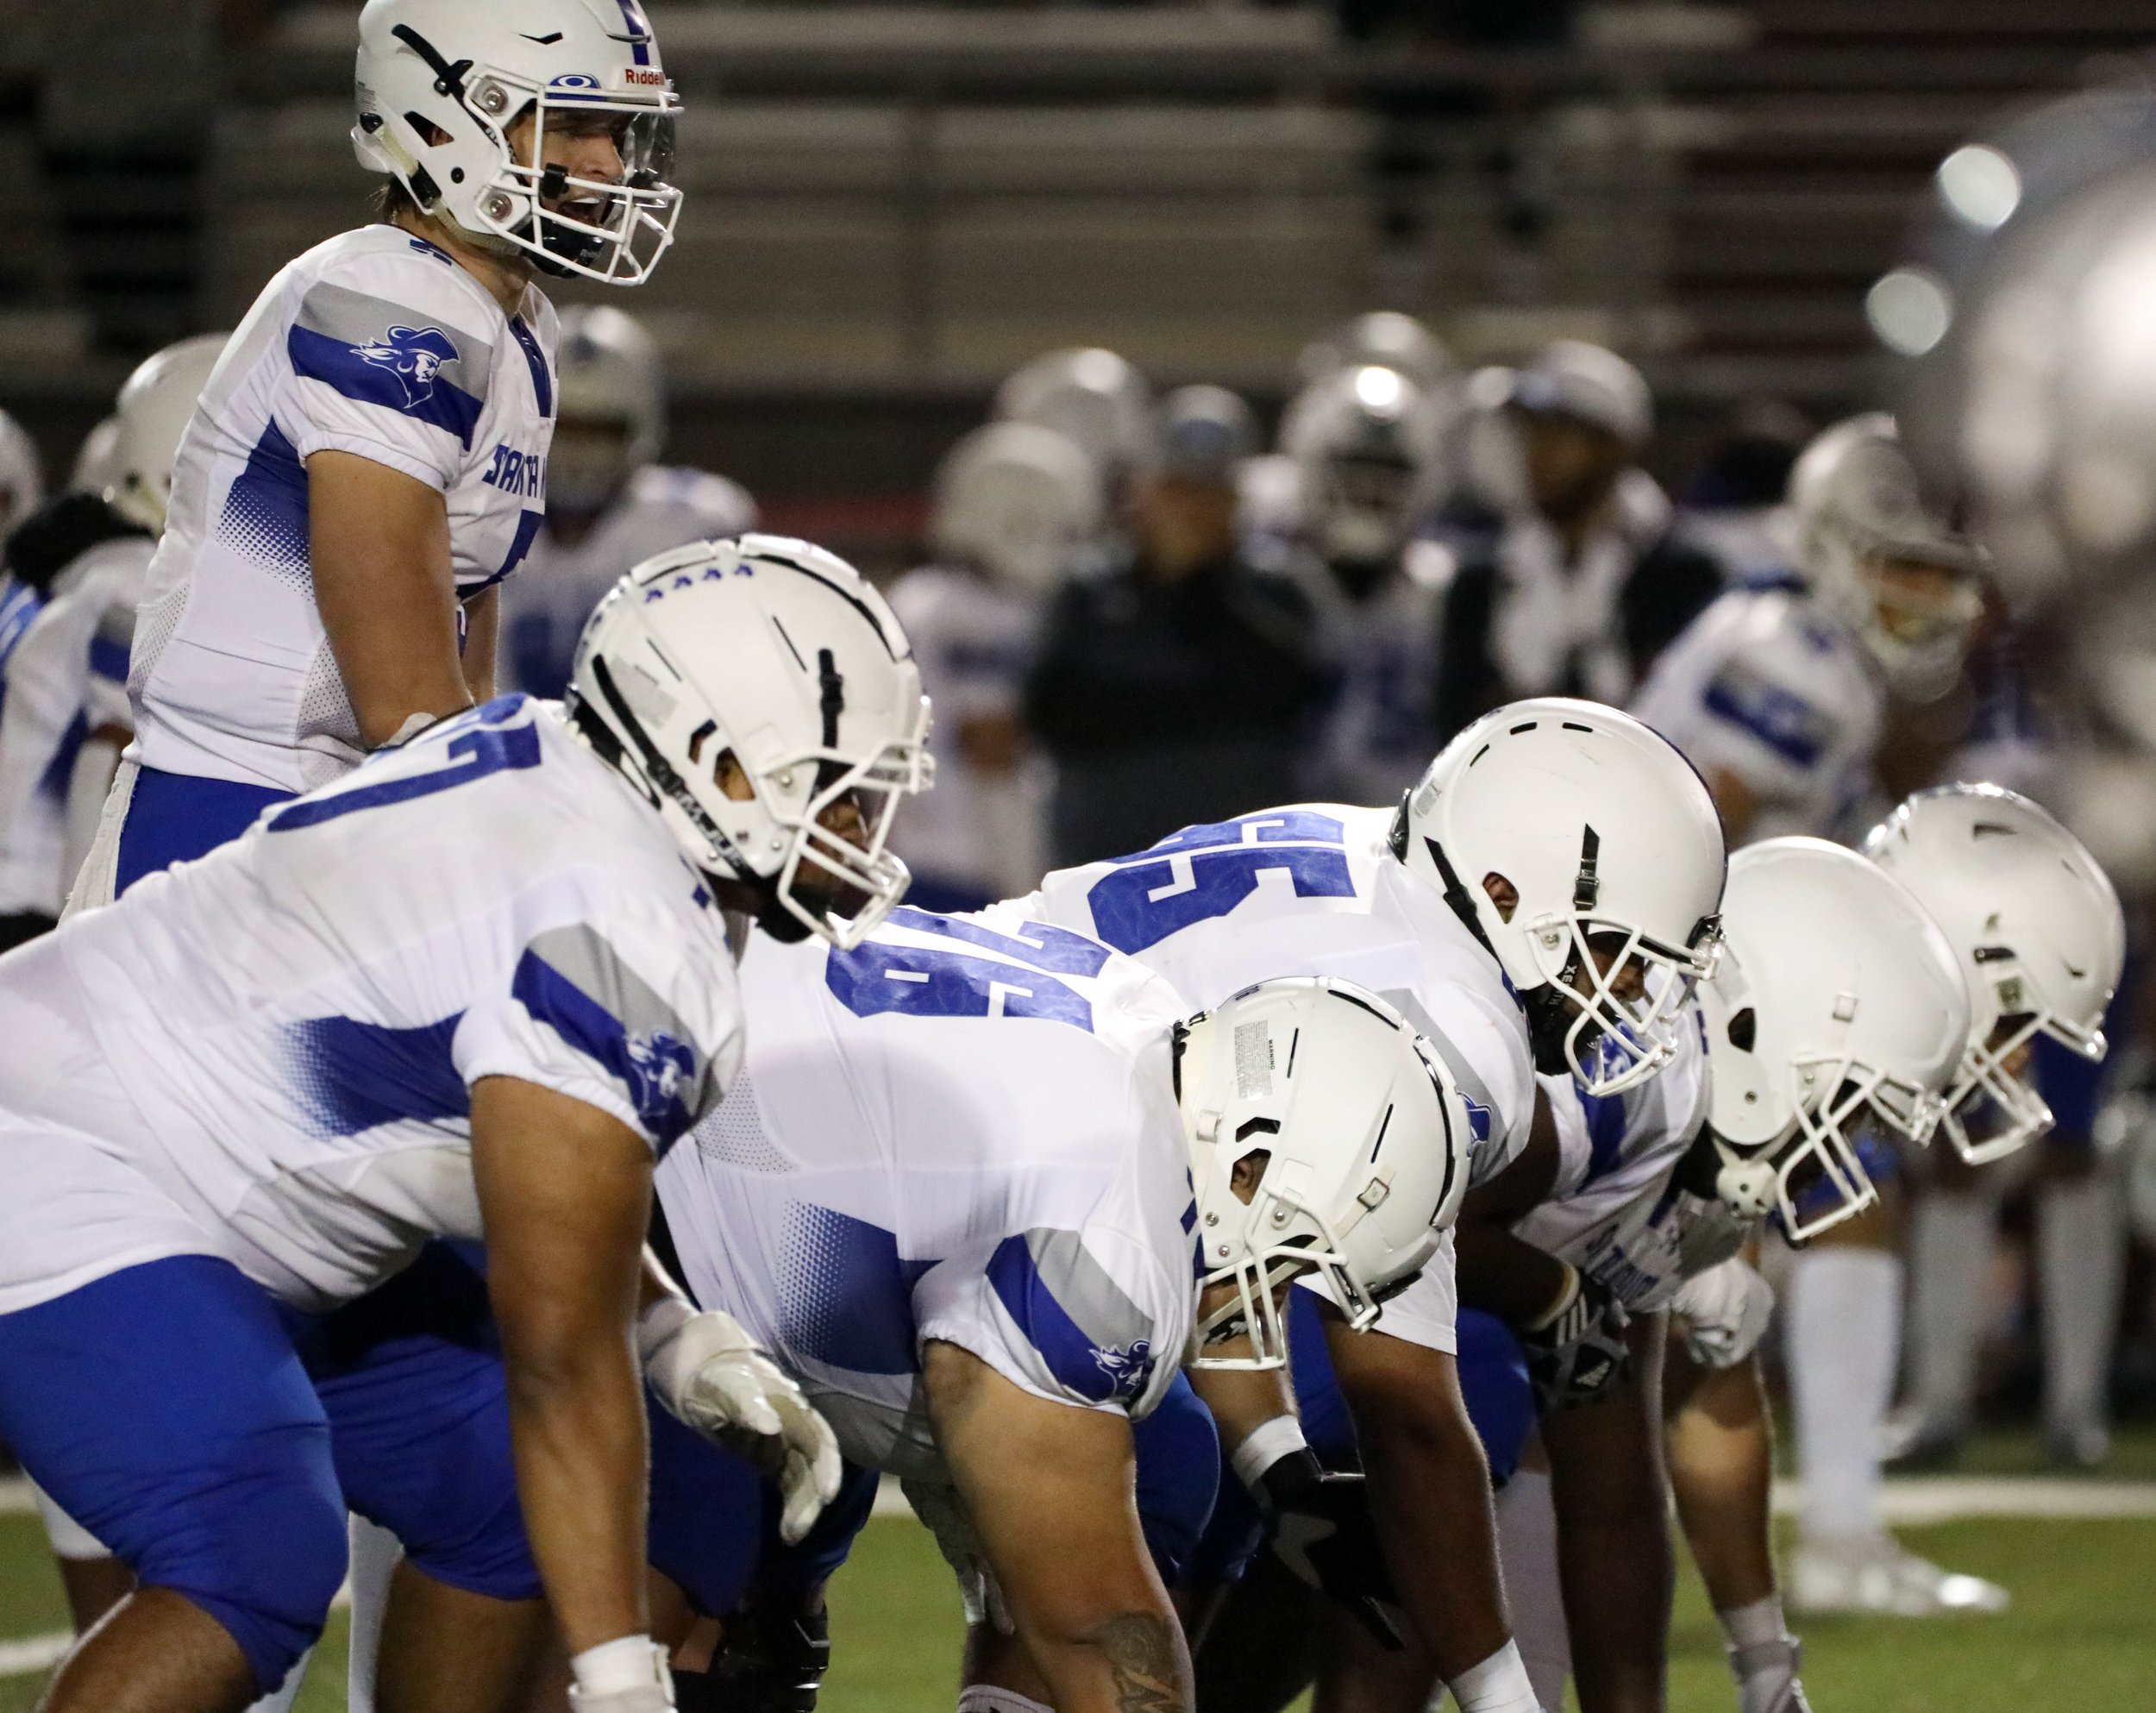  The Santa Monica College Corsair Football Offensive team getting ready to start the play against the Compton College Tartars on Saturday, Sept. 17 at Compton, Calif. (Danilo Perez | The Corsair) 